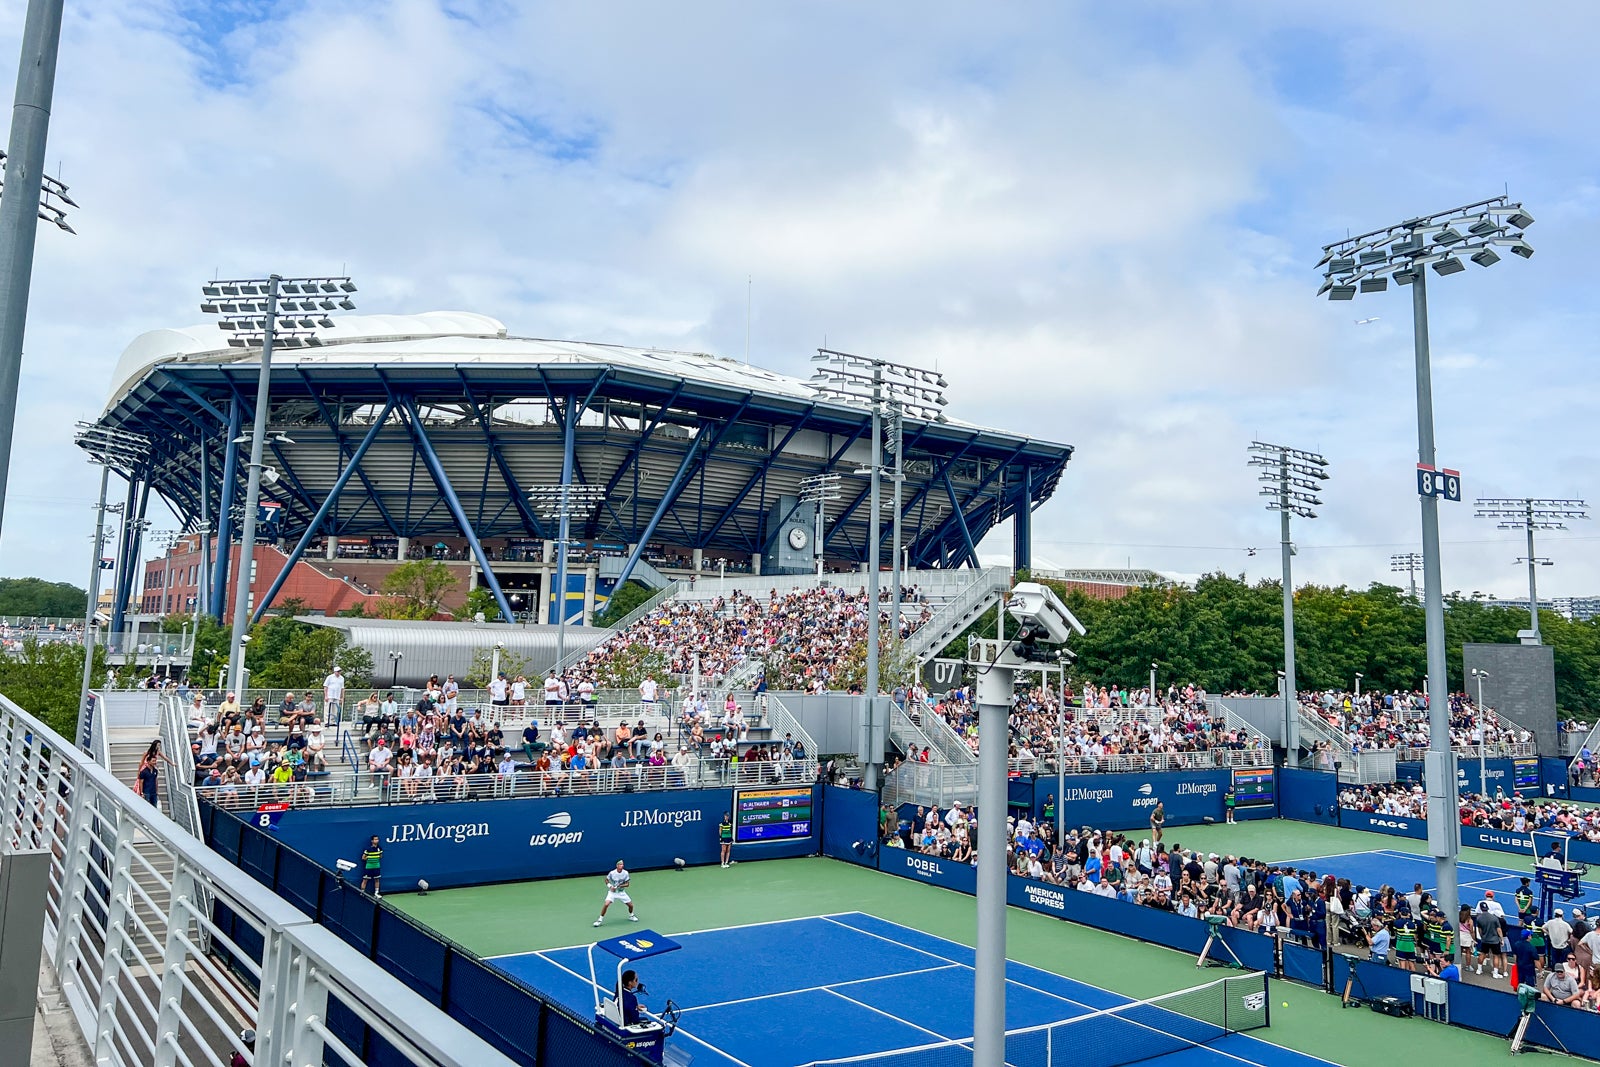 A review of the Chase Lounge and Terrace at the US Open